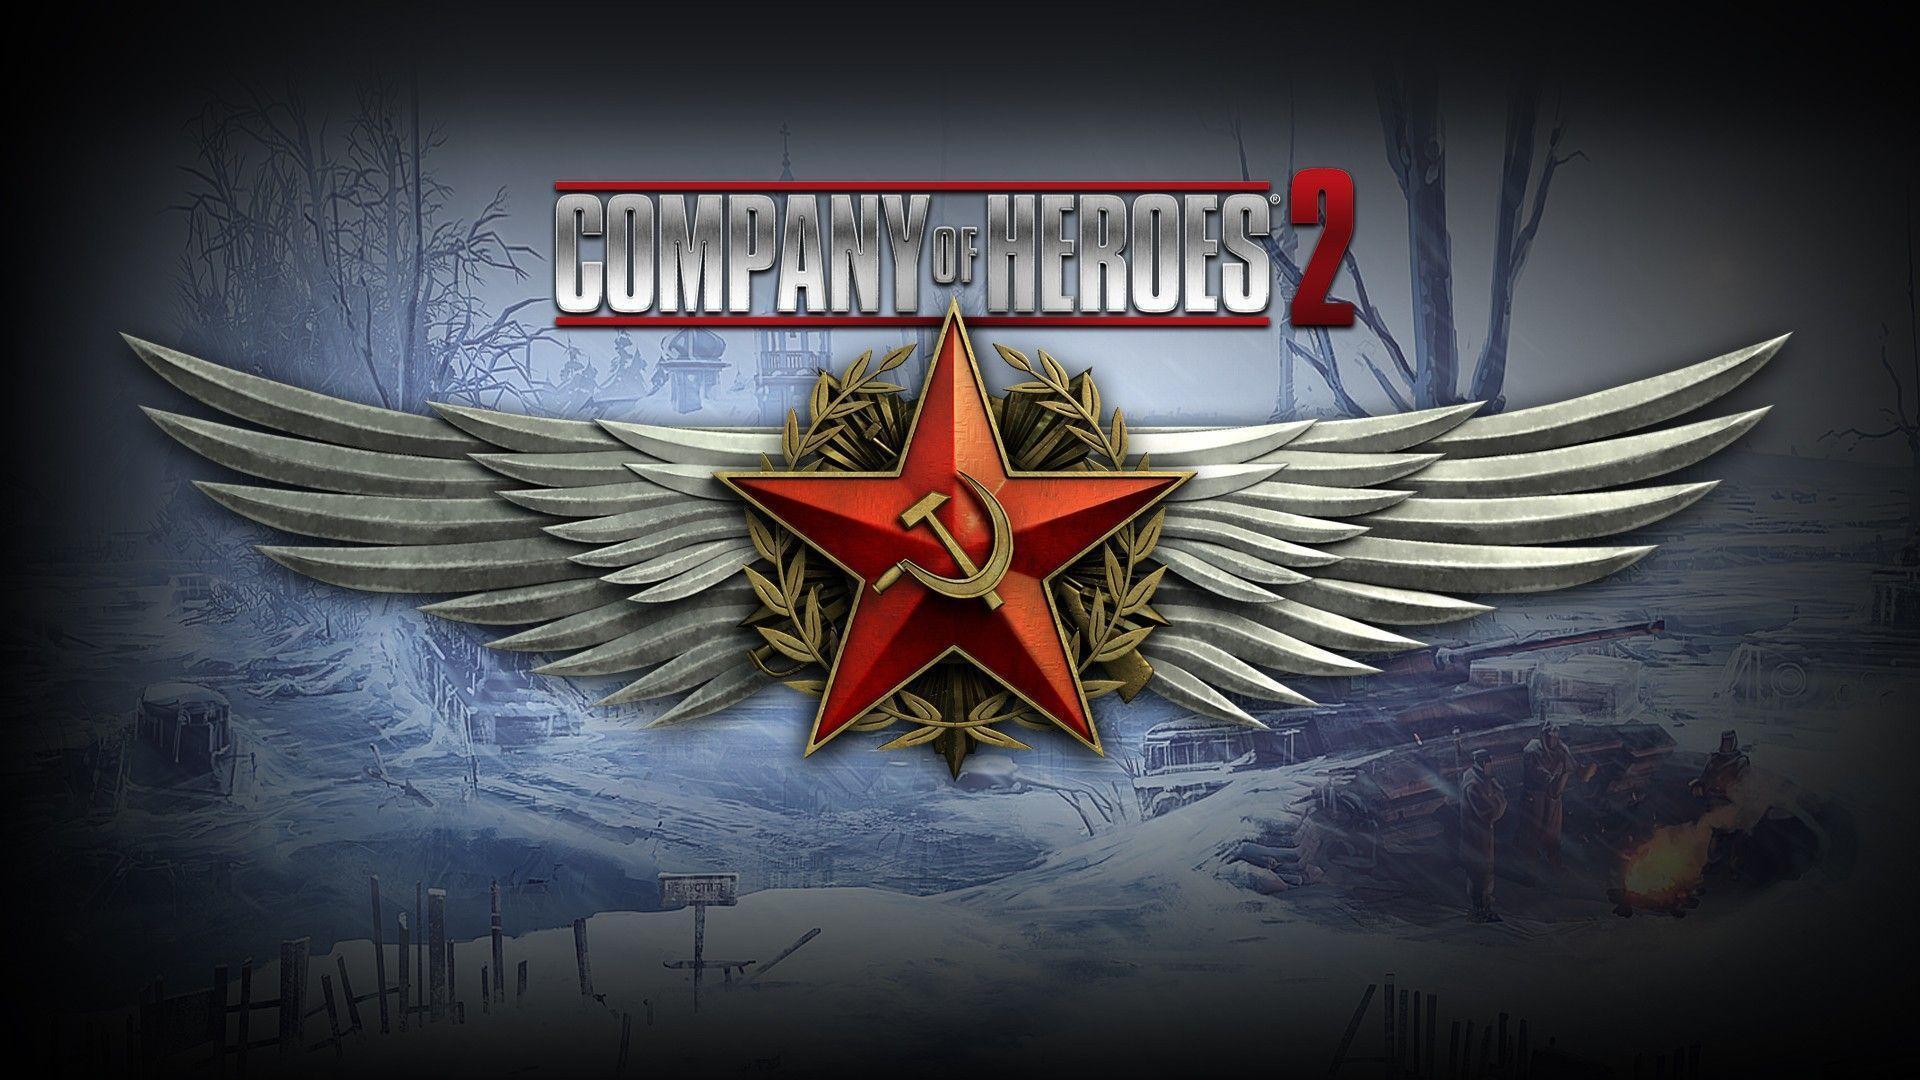 Company Of Heroes 2 Wallpaper. Company Of Heroes 2 Background